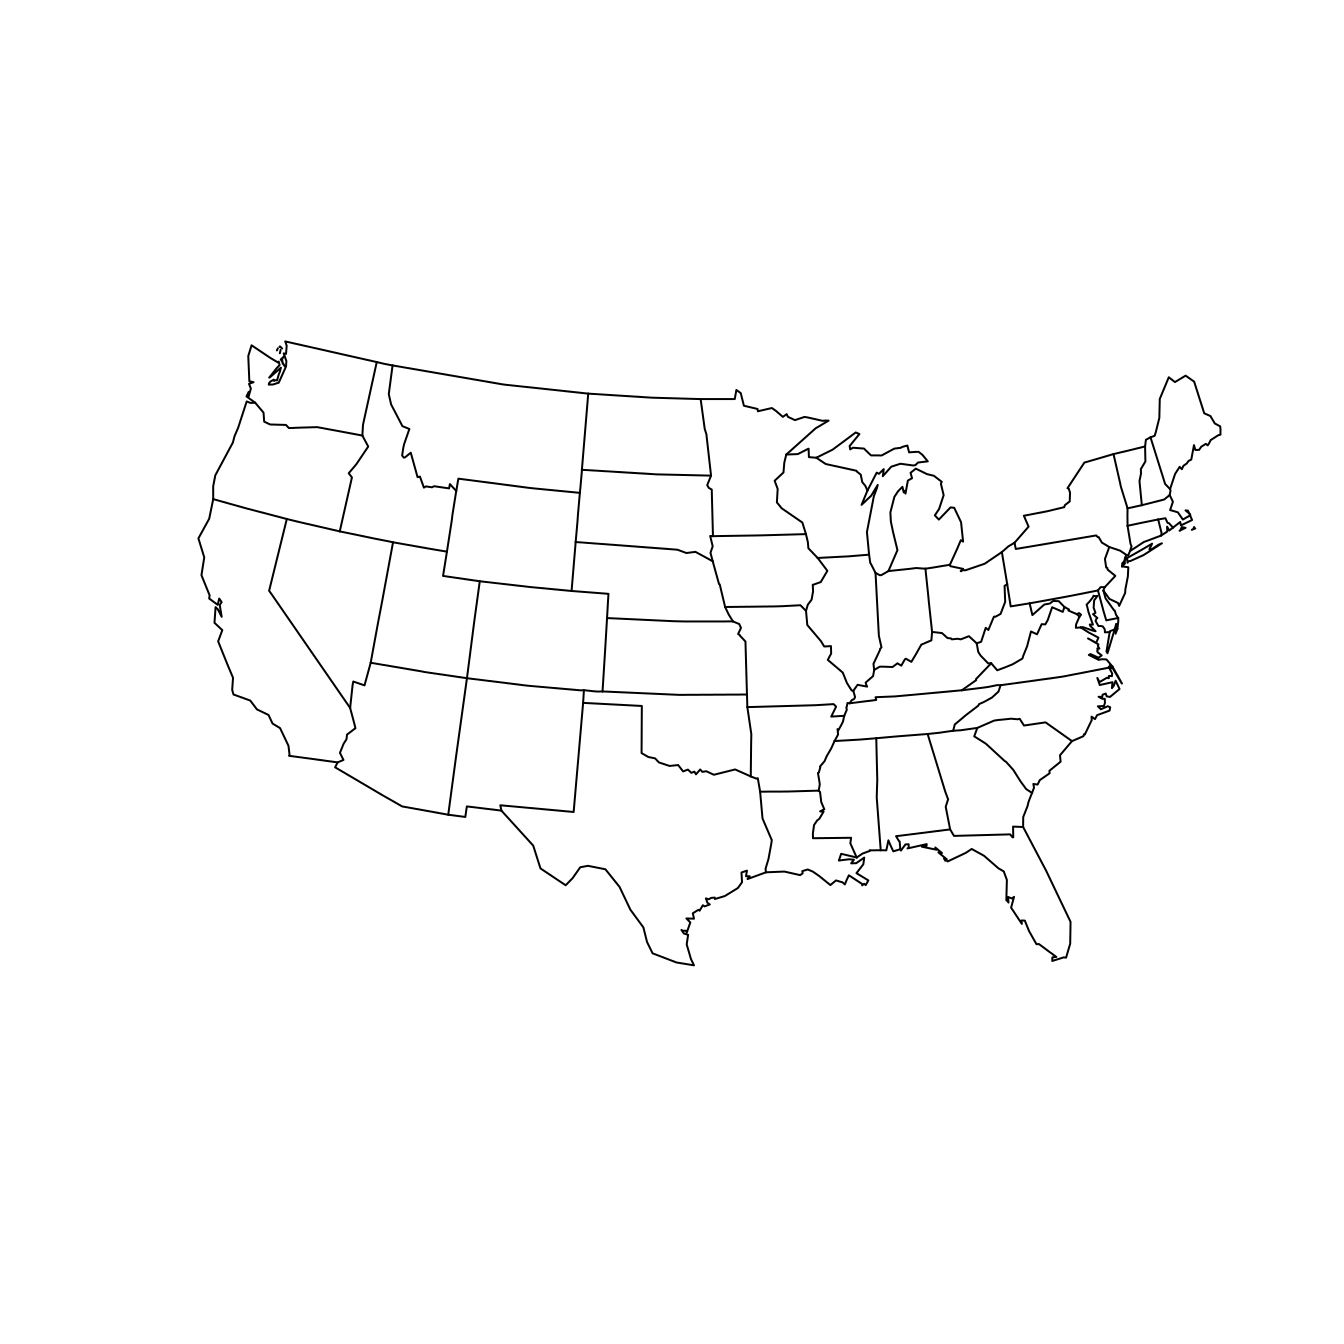 The contiguous United States according to the Lambert conformal conic (left) and Albers equal area (right) projections. We have specified that the scales are true on the 20th and 50th parallels.